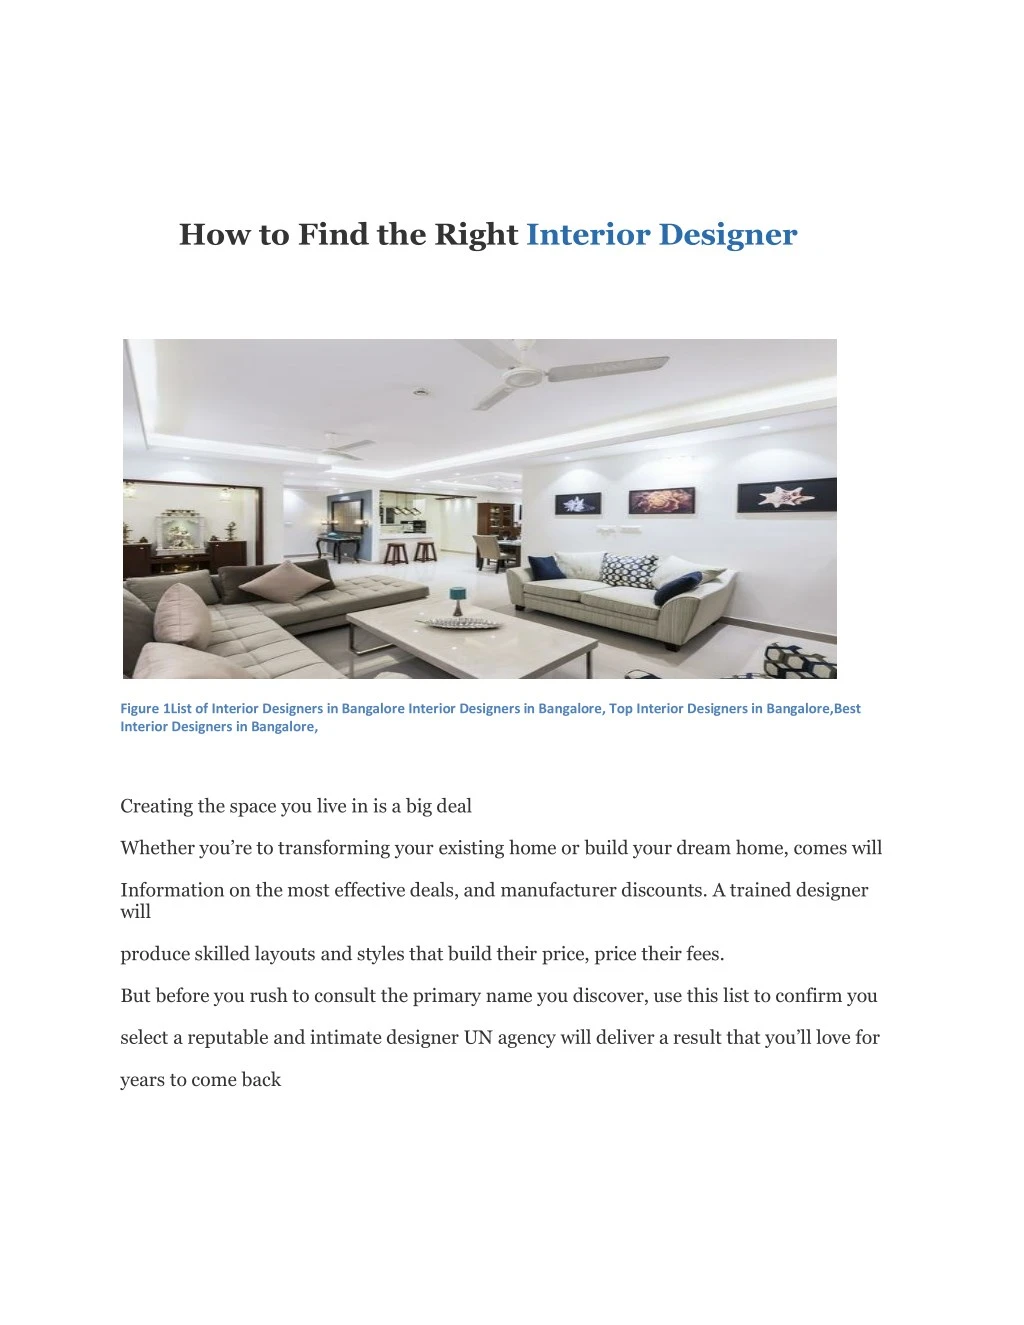 how to find the right interior designer